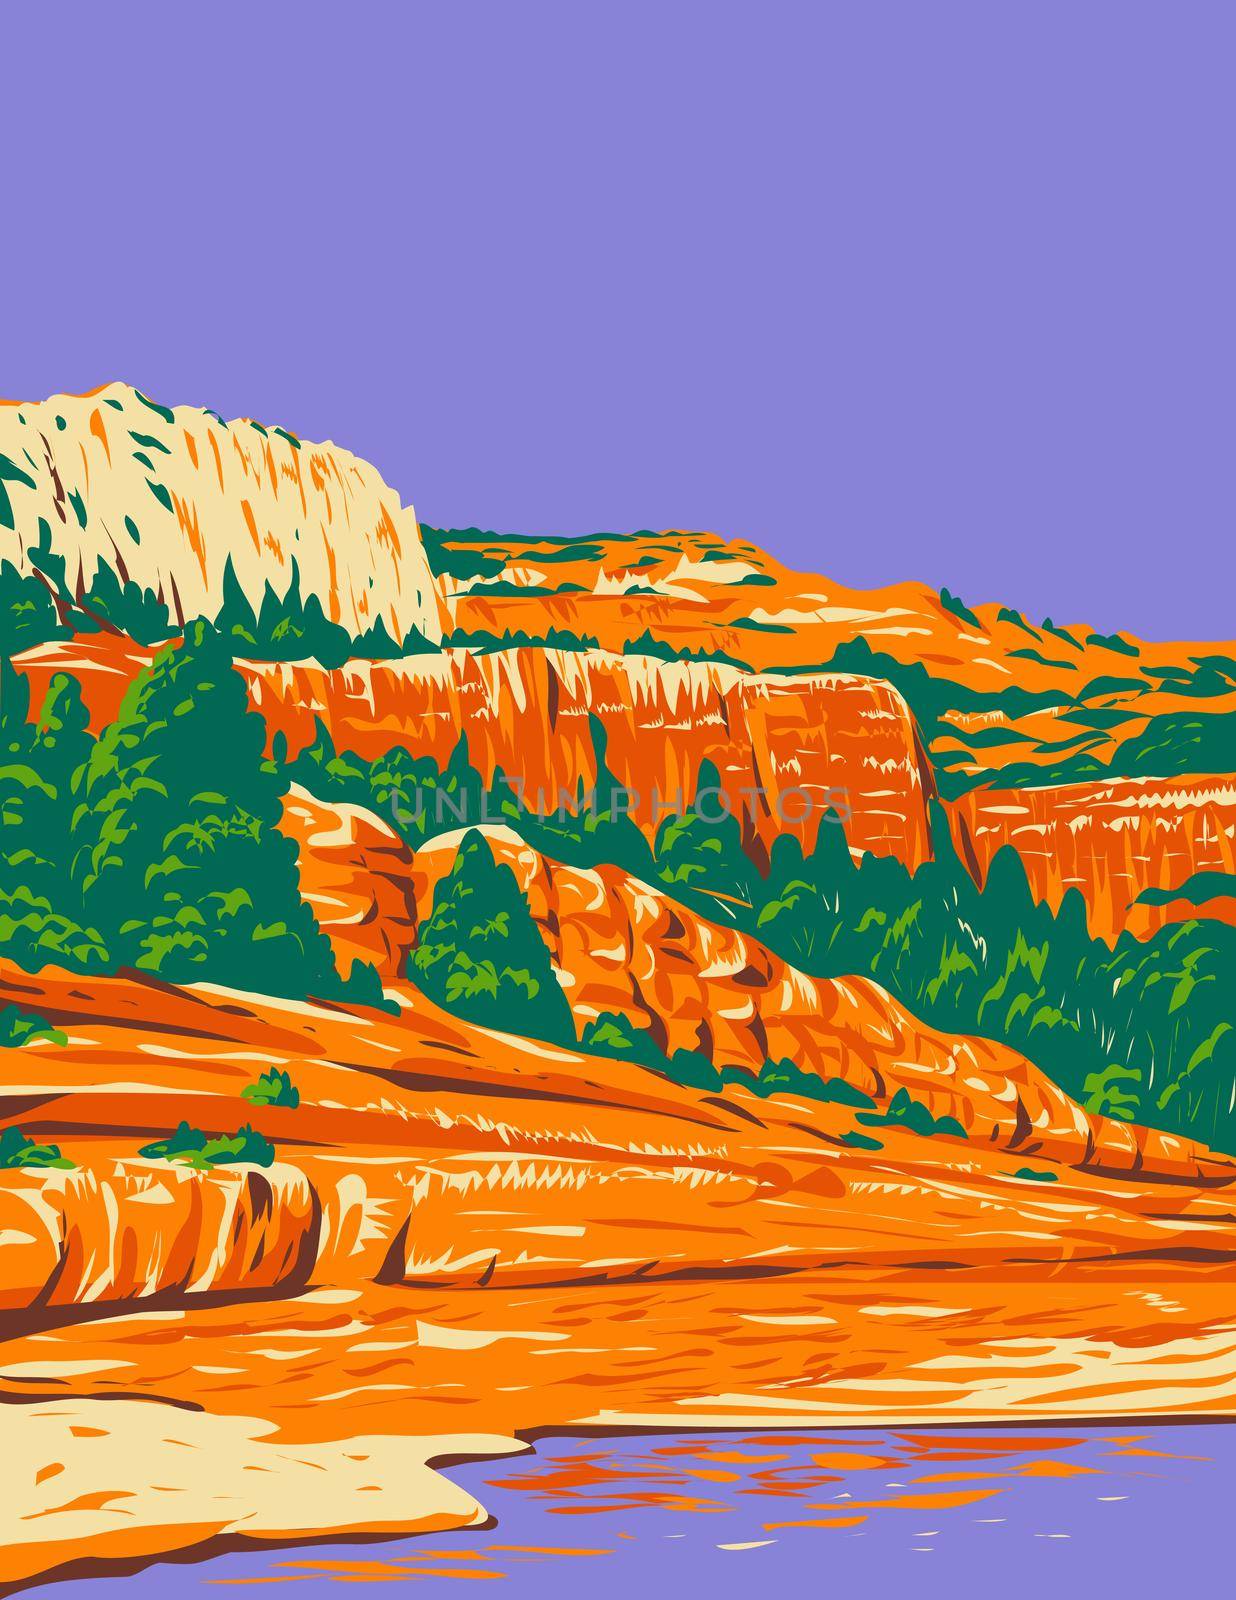 WPA poster art of Slide Rock State Park located in Oak Creek Canyon in Sedona, Arizona, United States of America USA done in works project administration style.
